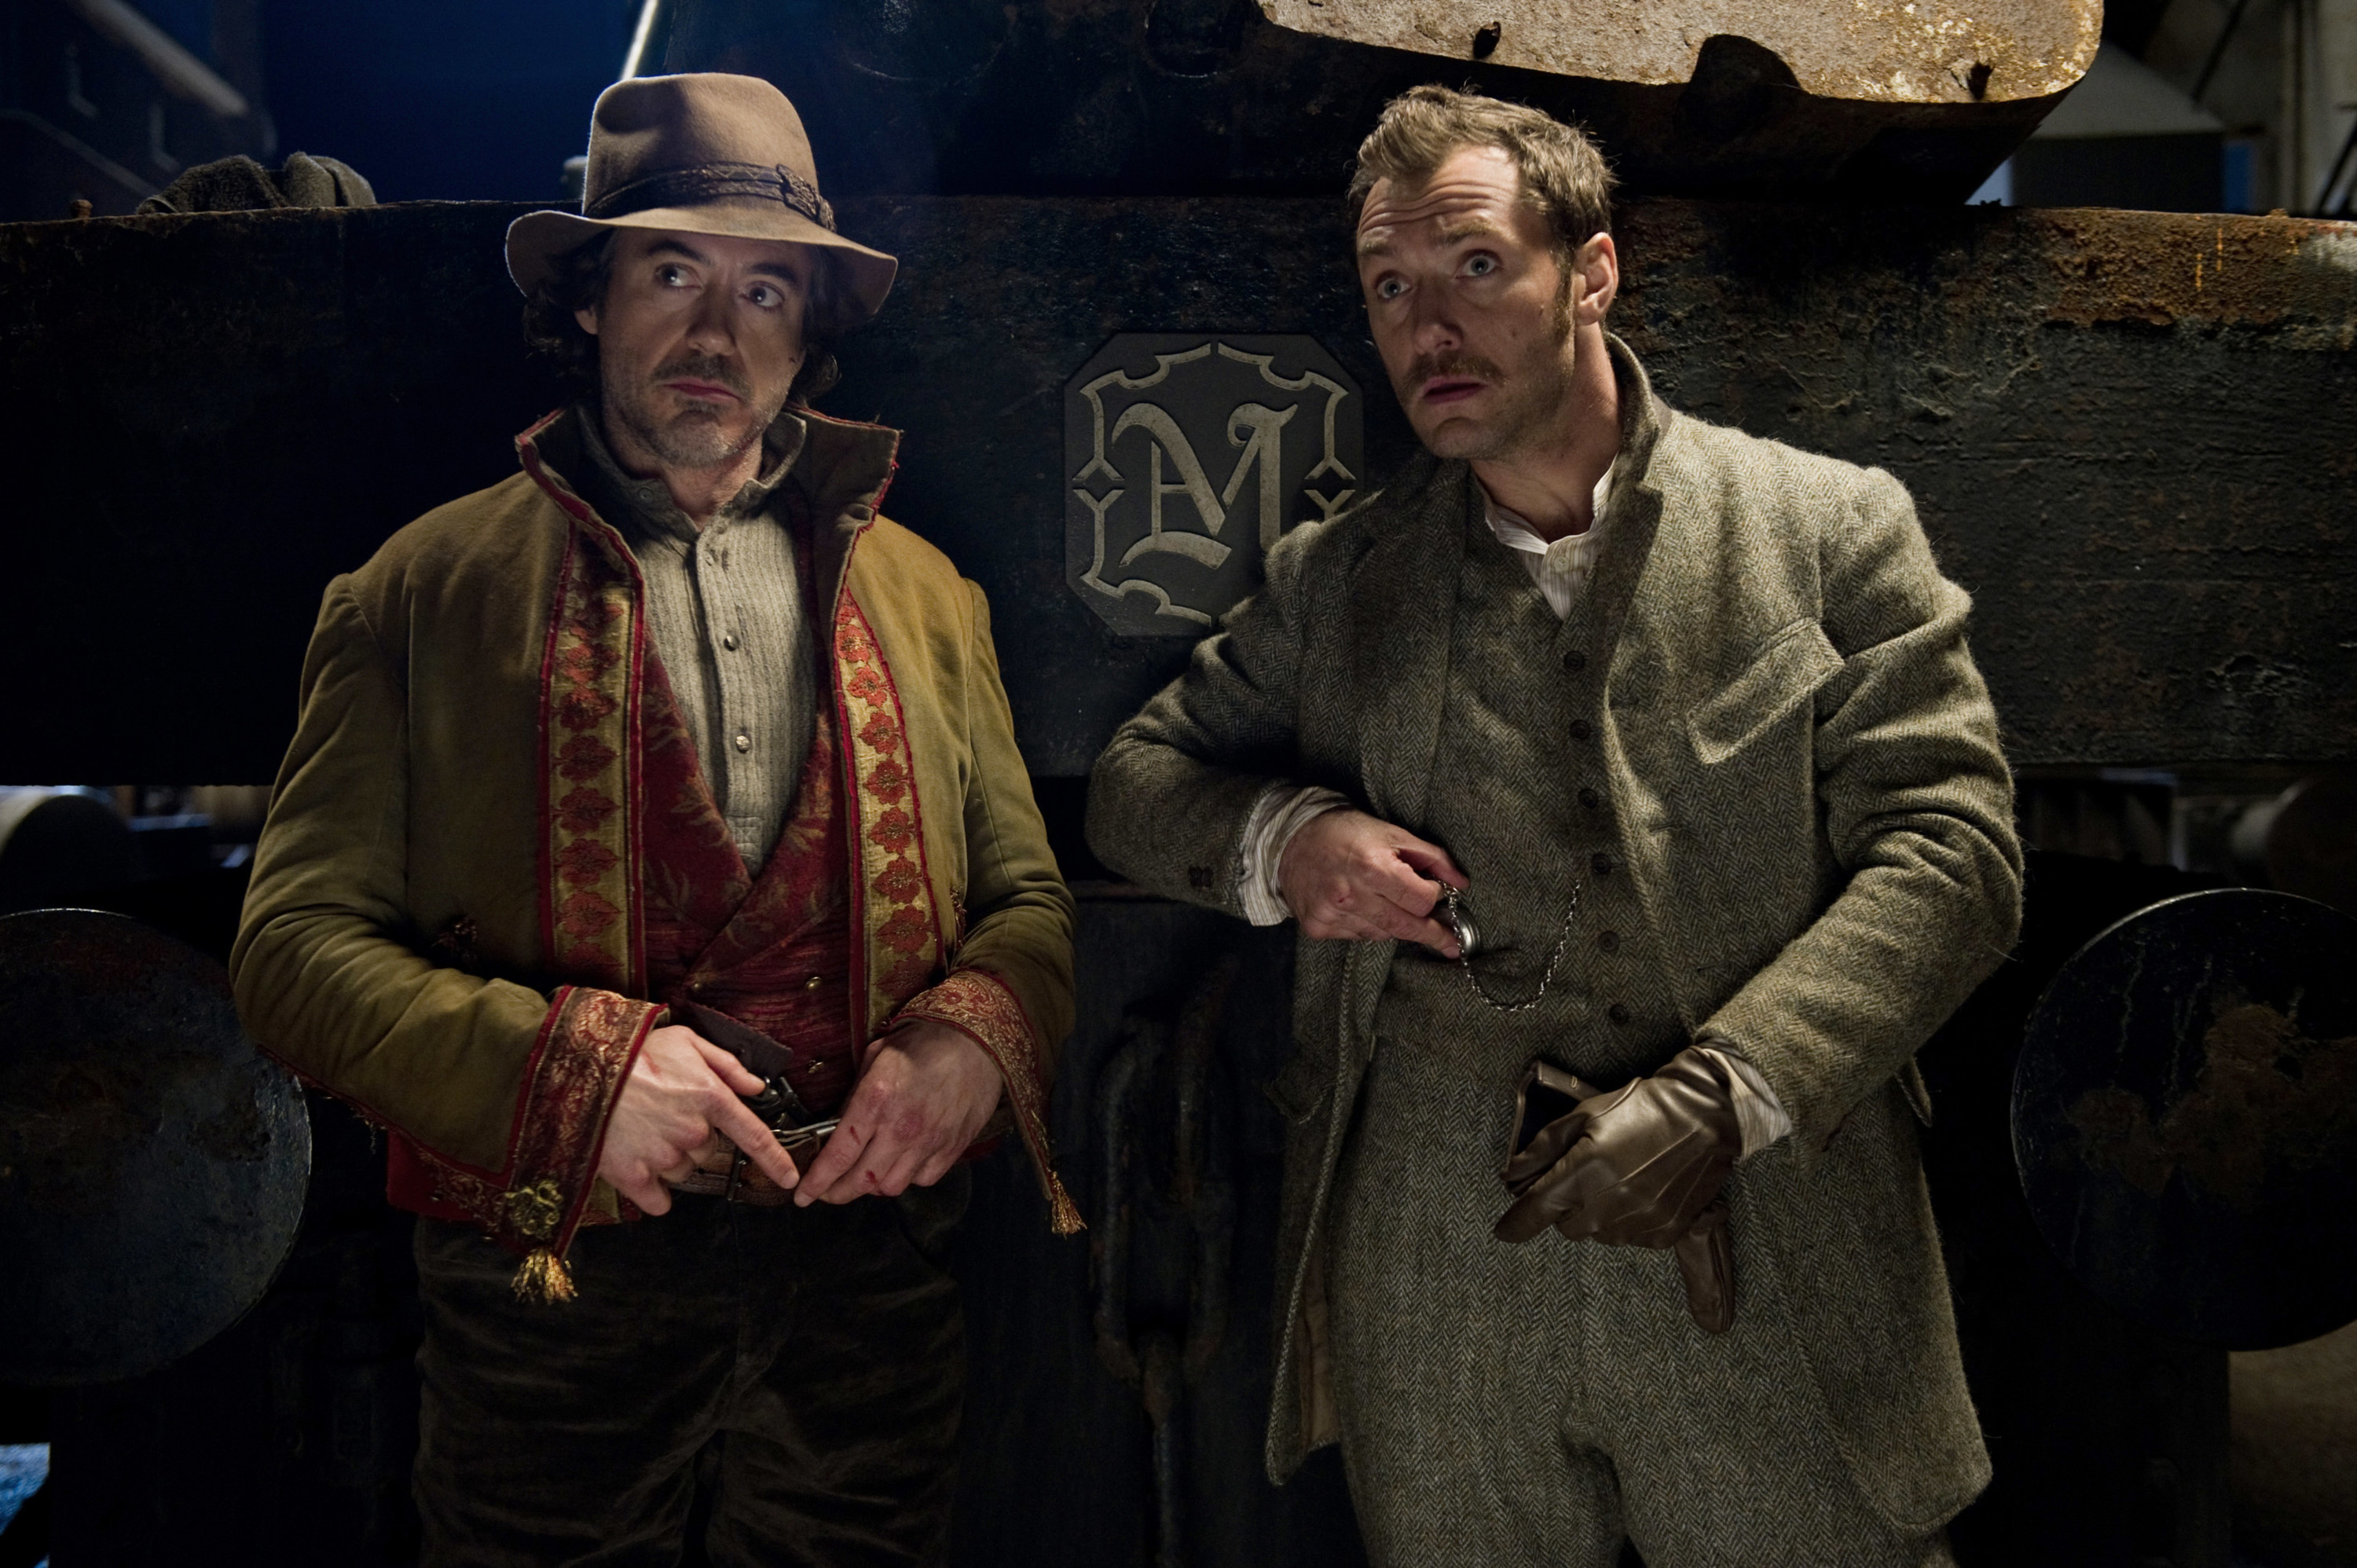 Holmes and Watson standing next to each other